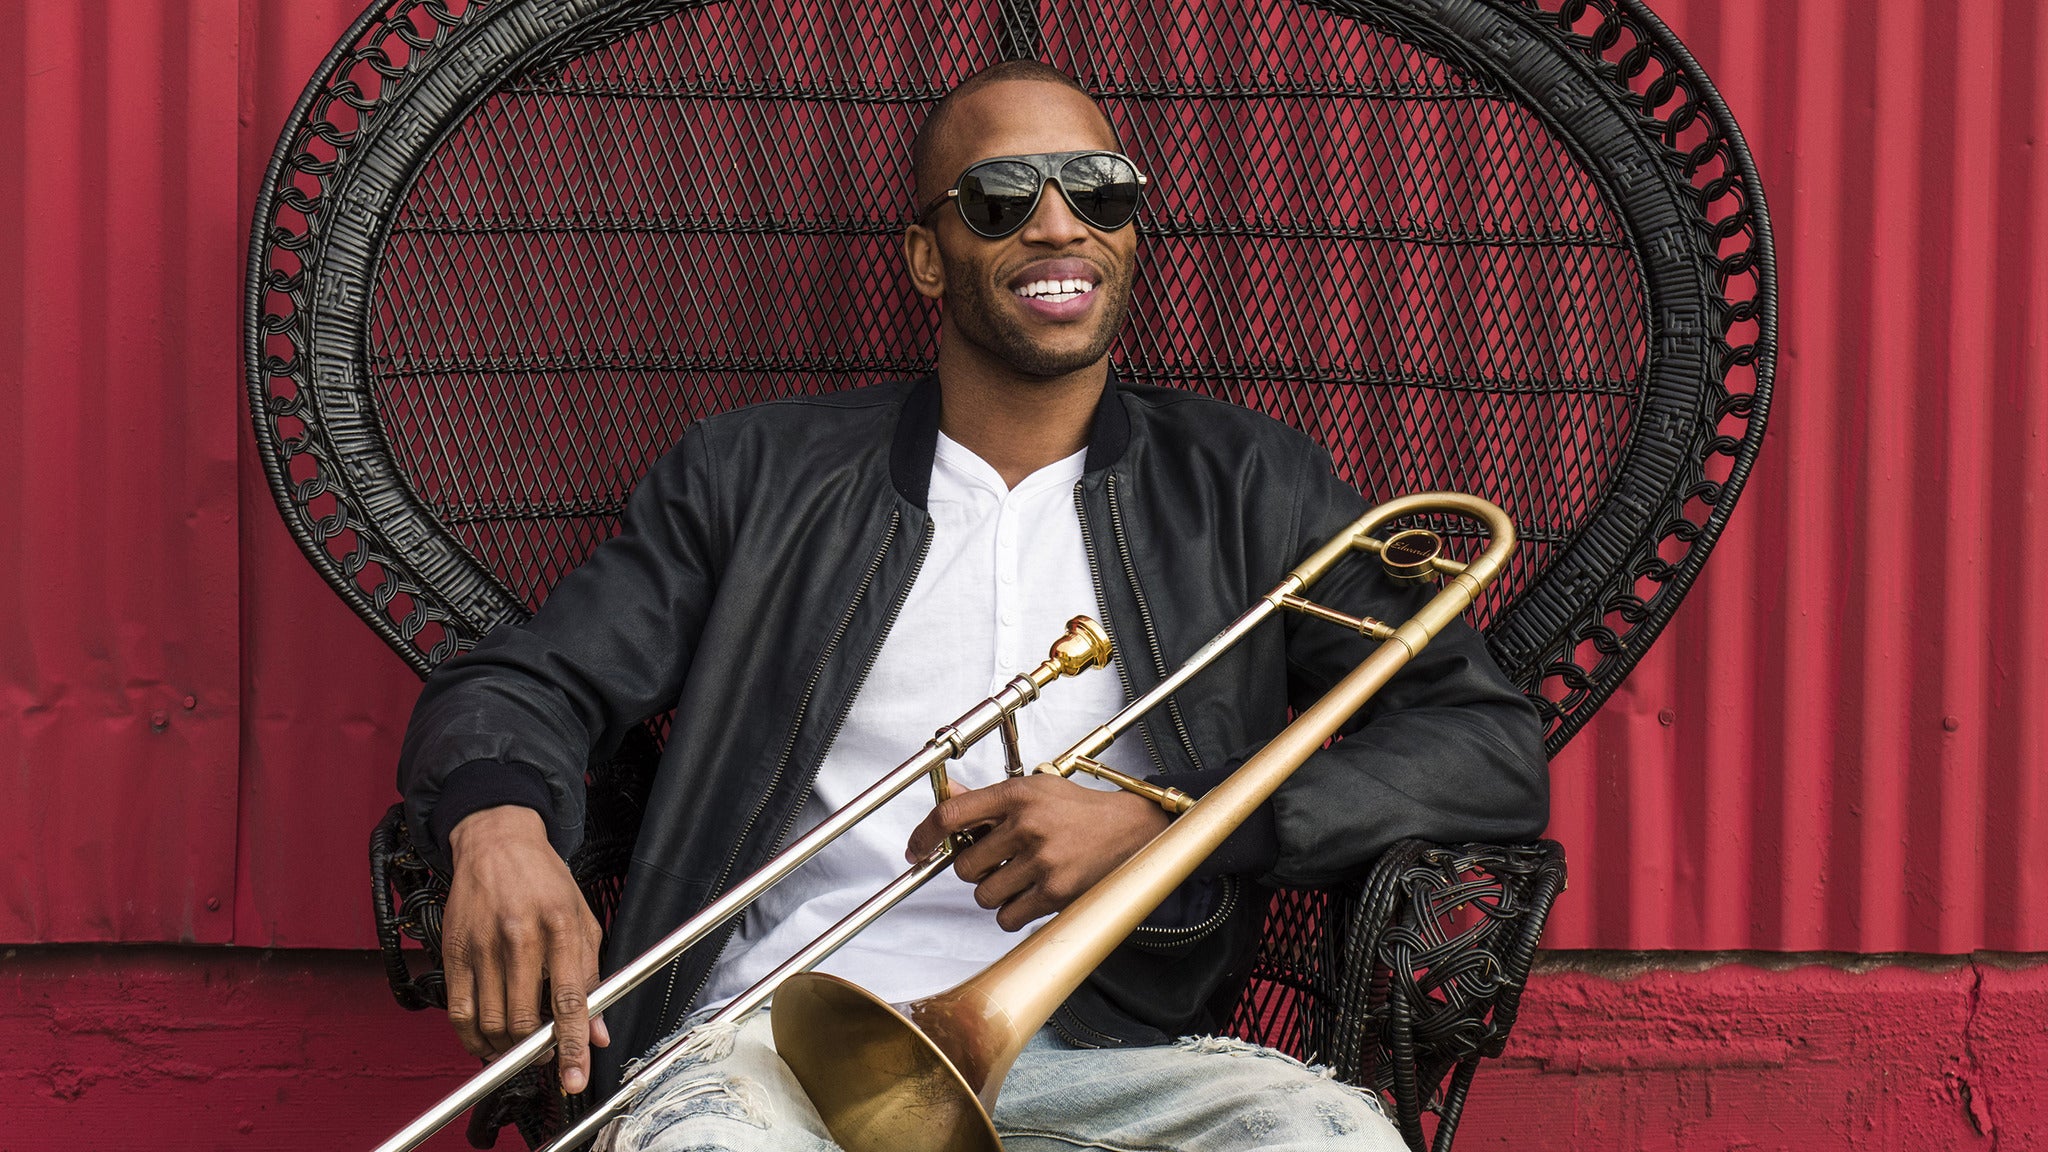 Trombone Shorty's Voodoo Threauxdown ft. Tank and the Bangas, Big Freedia and more at Ravinia Festival